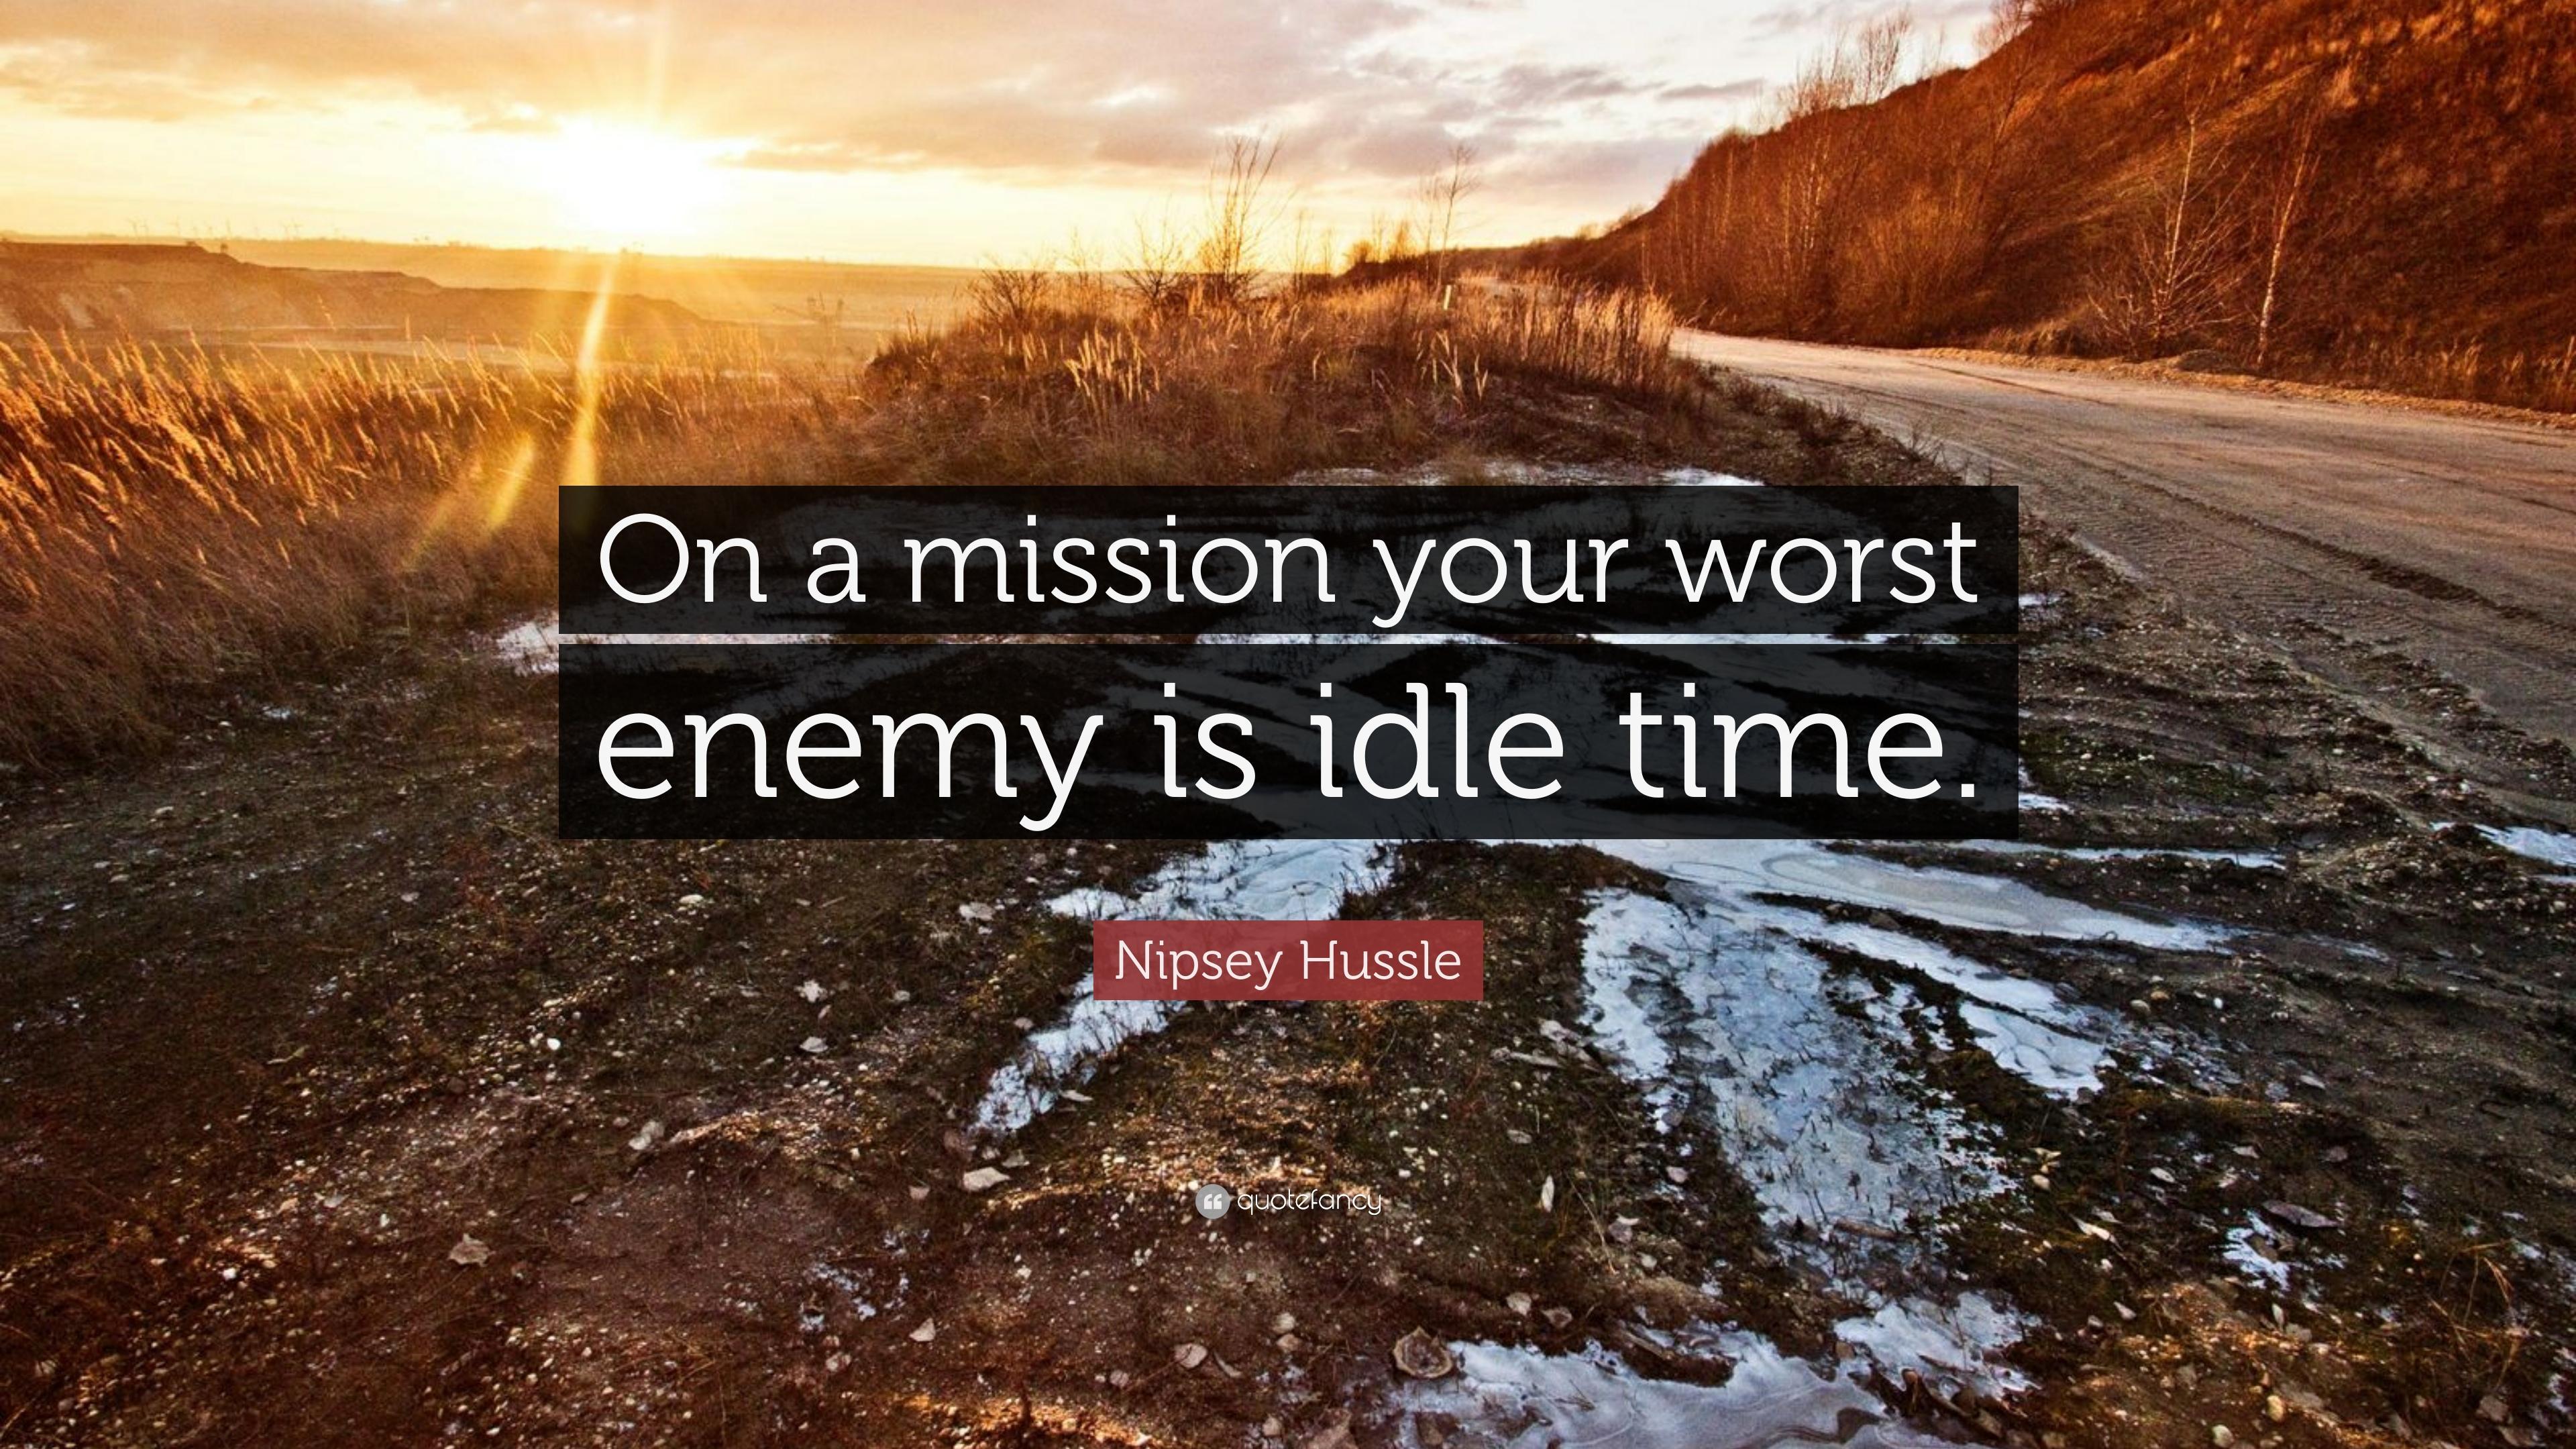 Nipsey Hussle Quote: “On a mission your worst enemy is idle time